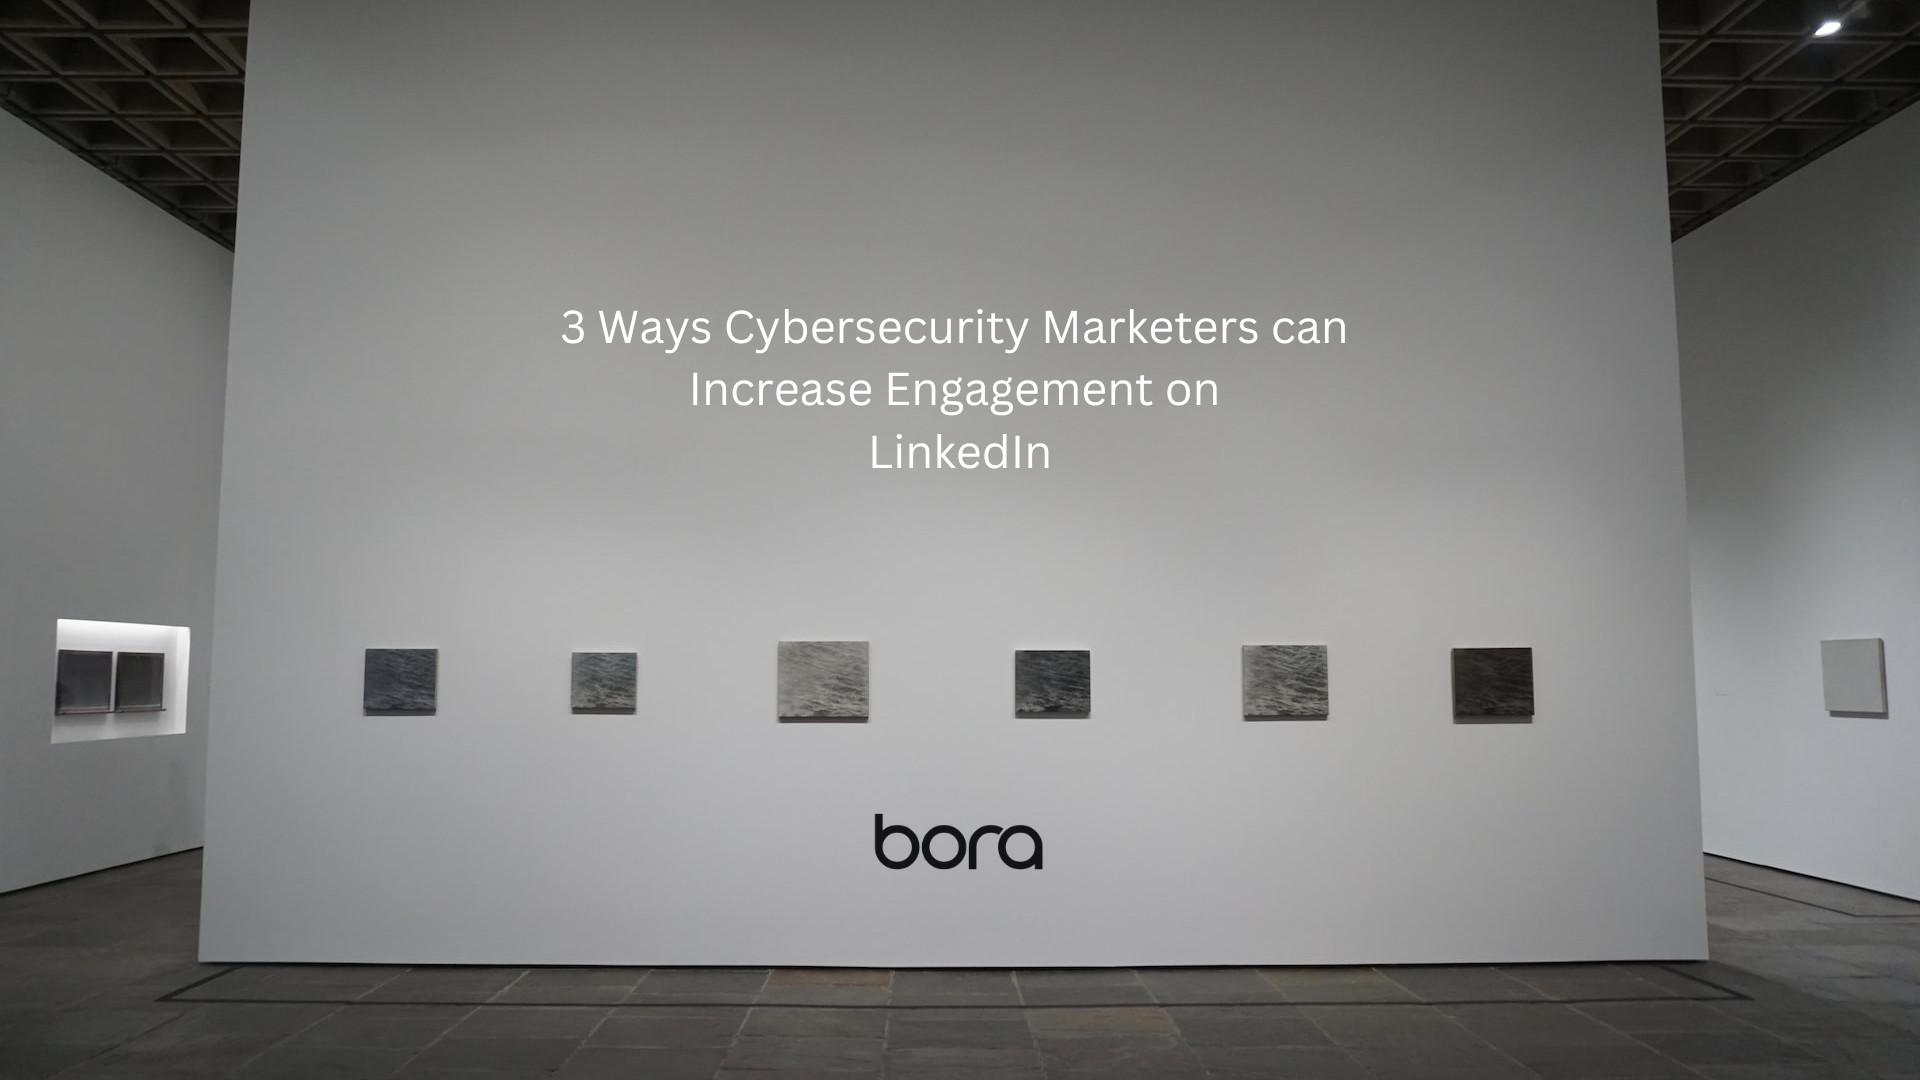 3 Ways Cybersecurity Marketers can Increase Engagement on LinkedIn